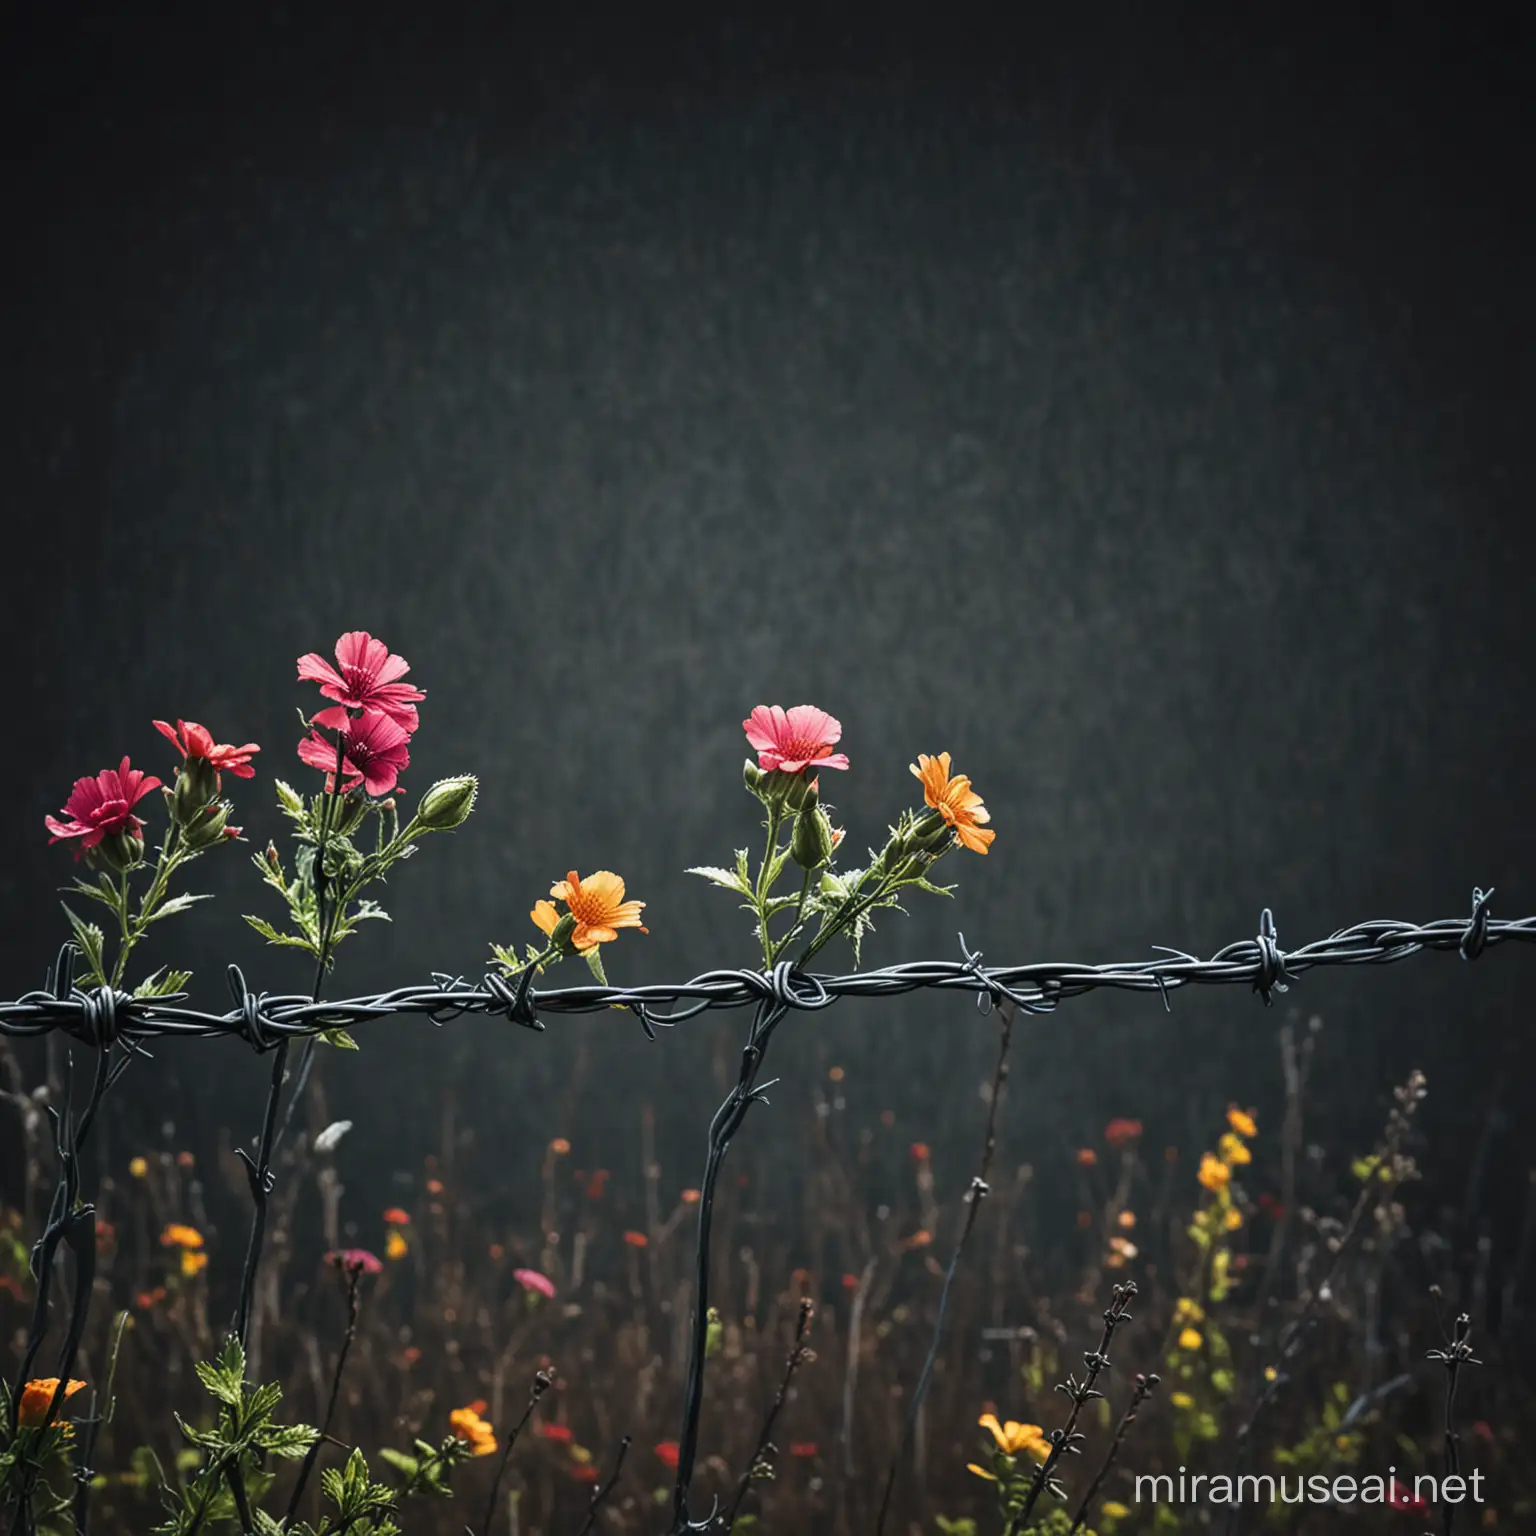 Blooming Flowers on Barbed Wire Against Dark Background